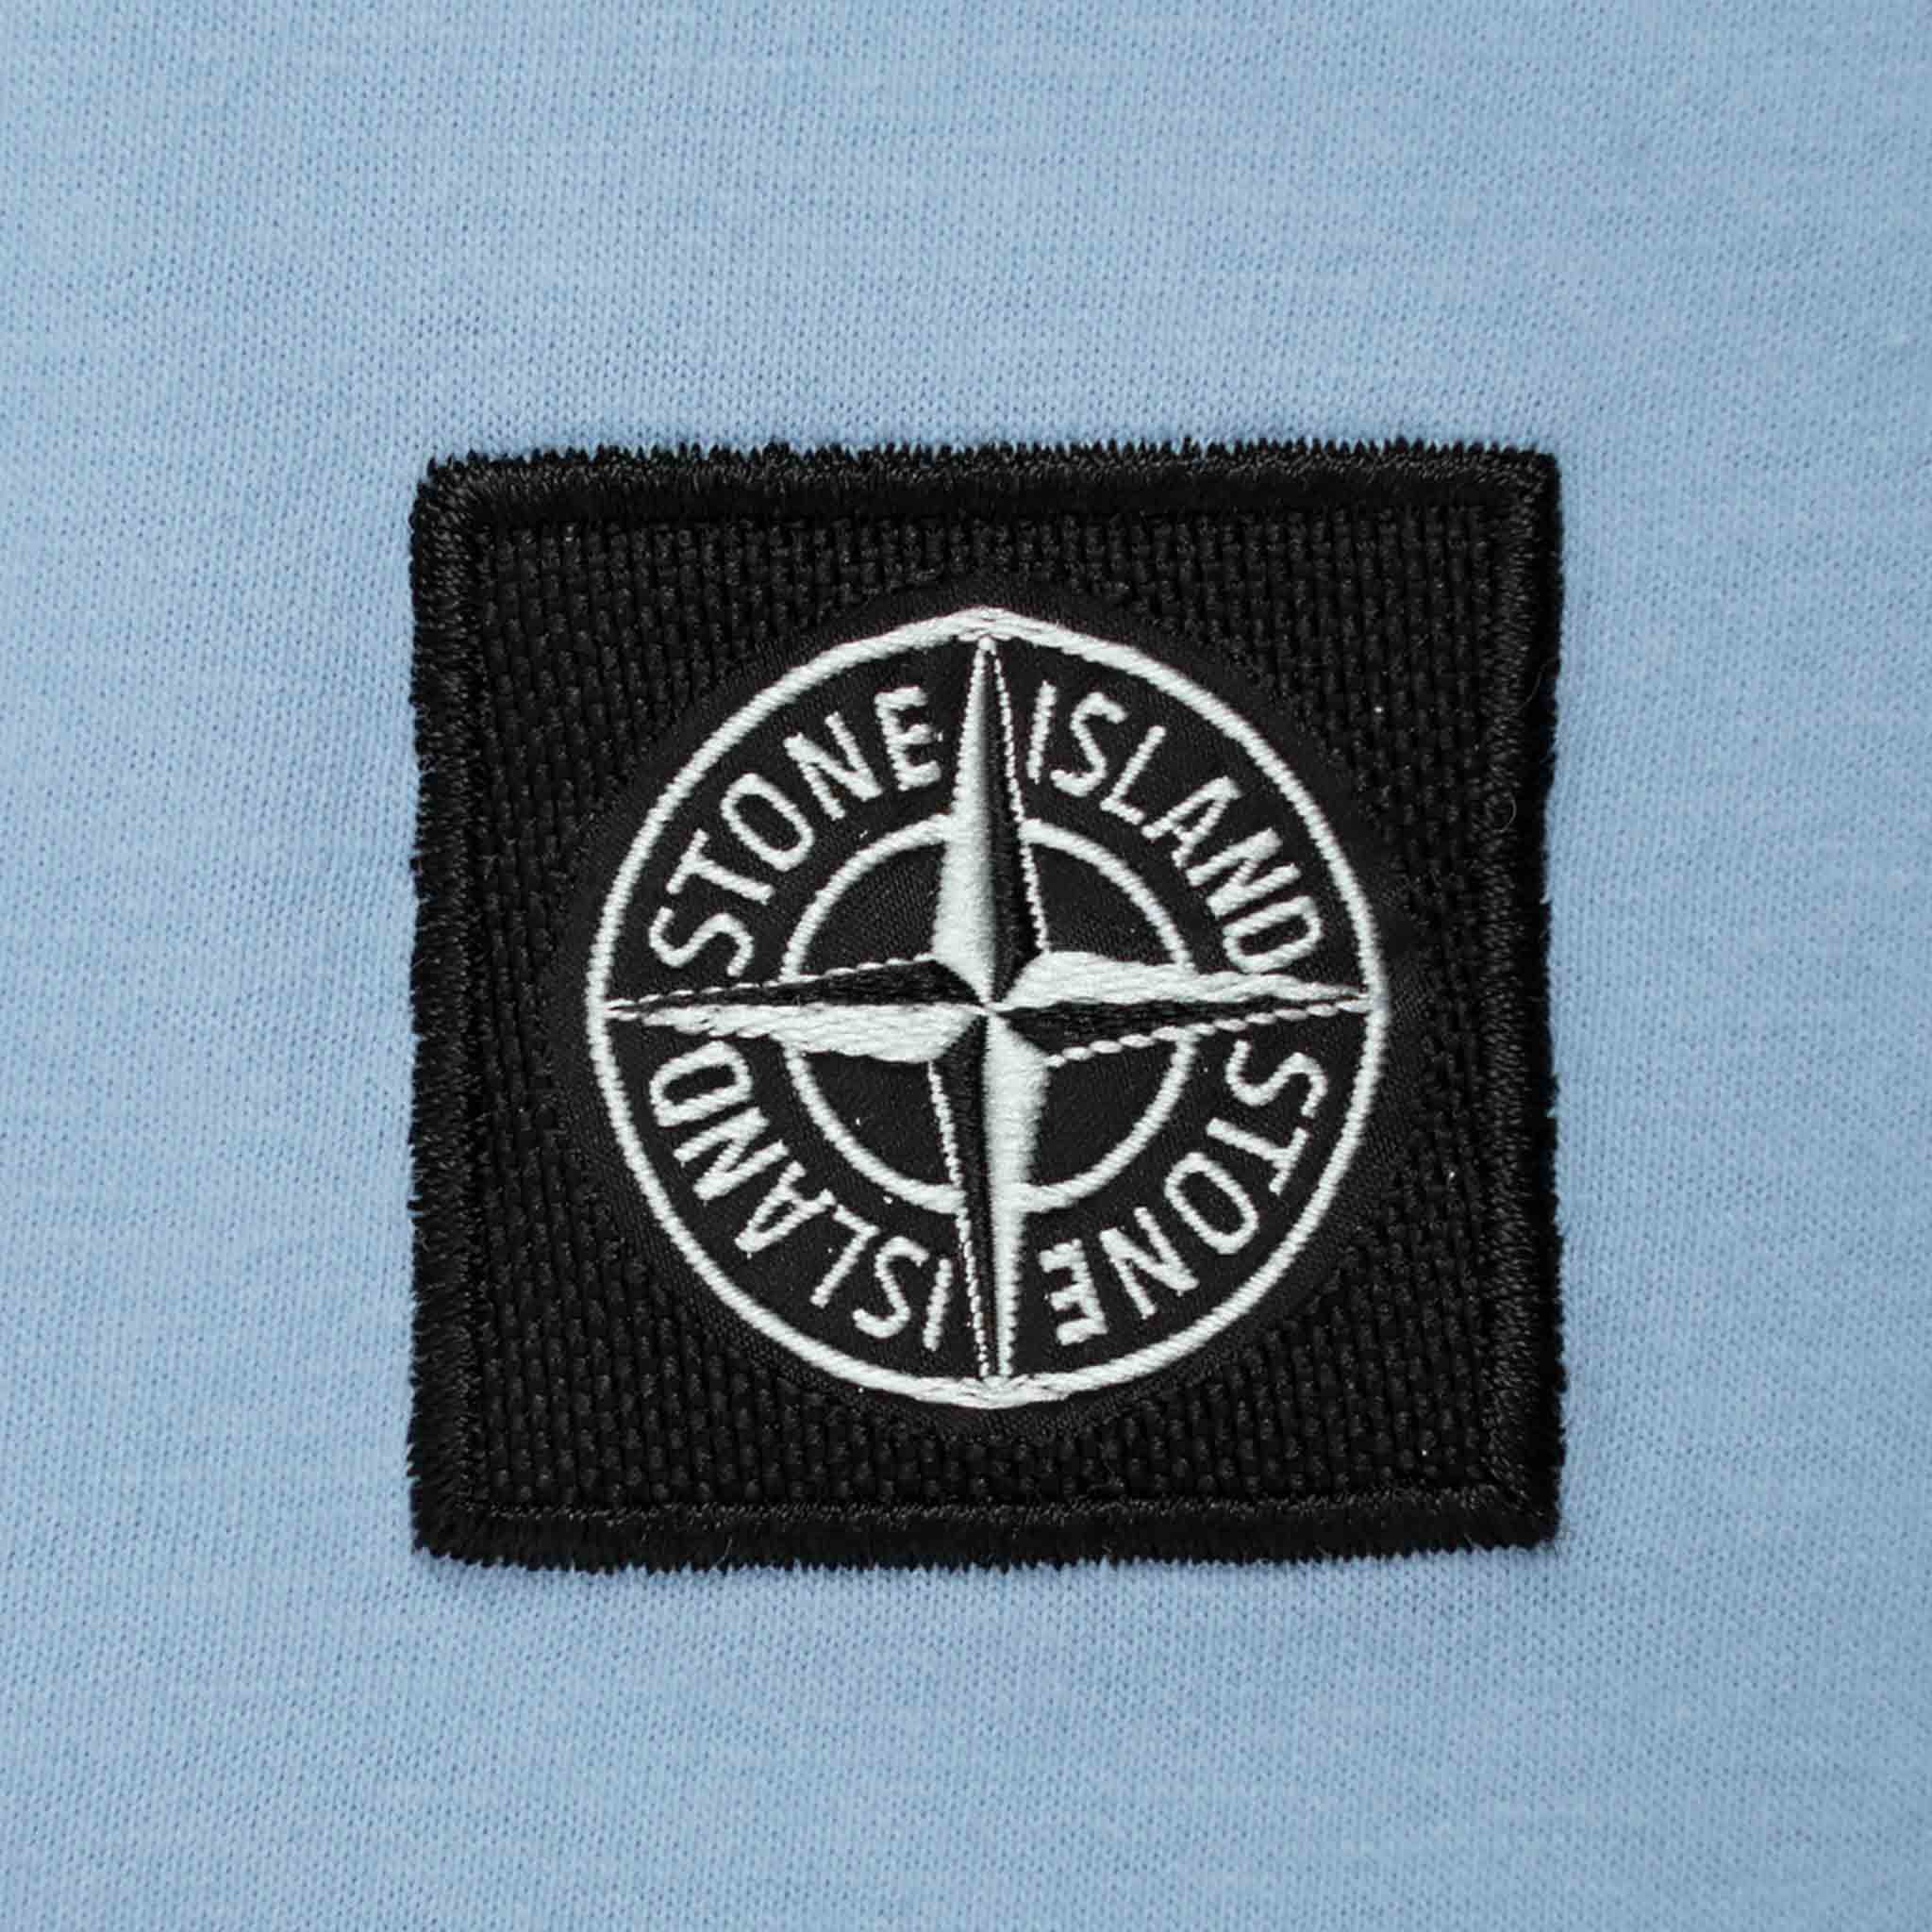 Stone Island Junior Compass T-Shirt in Lilac